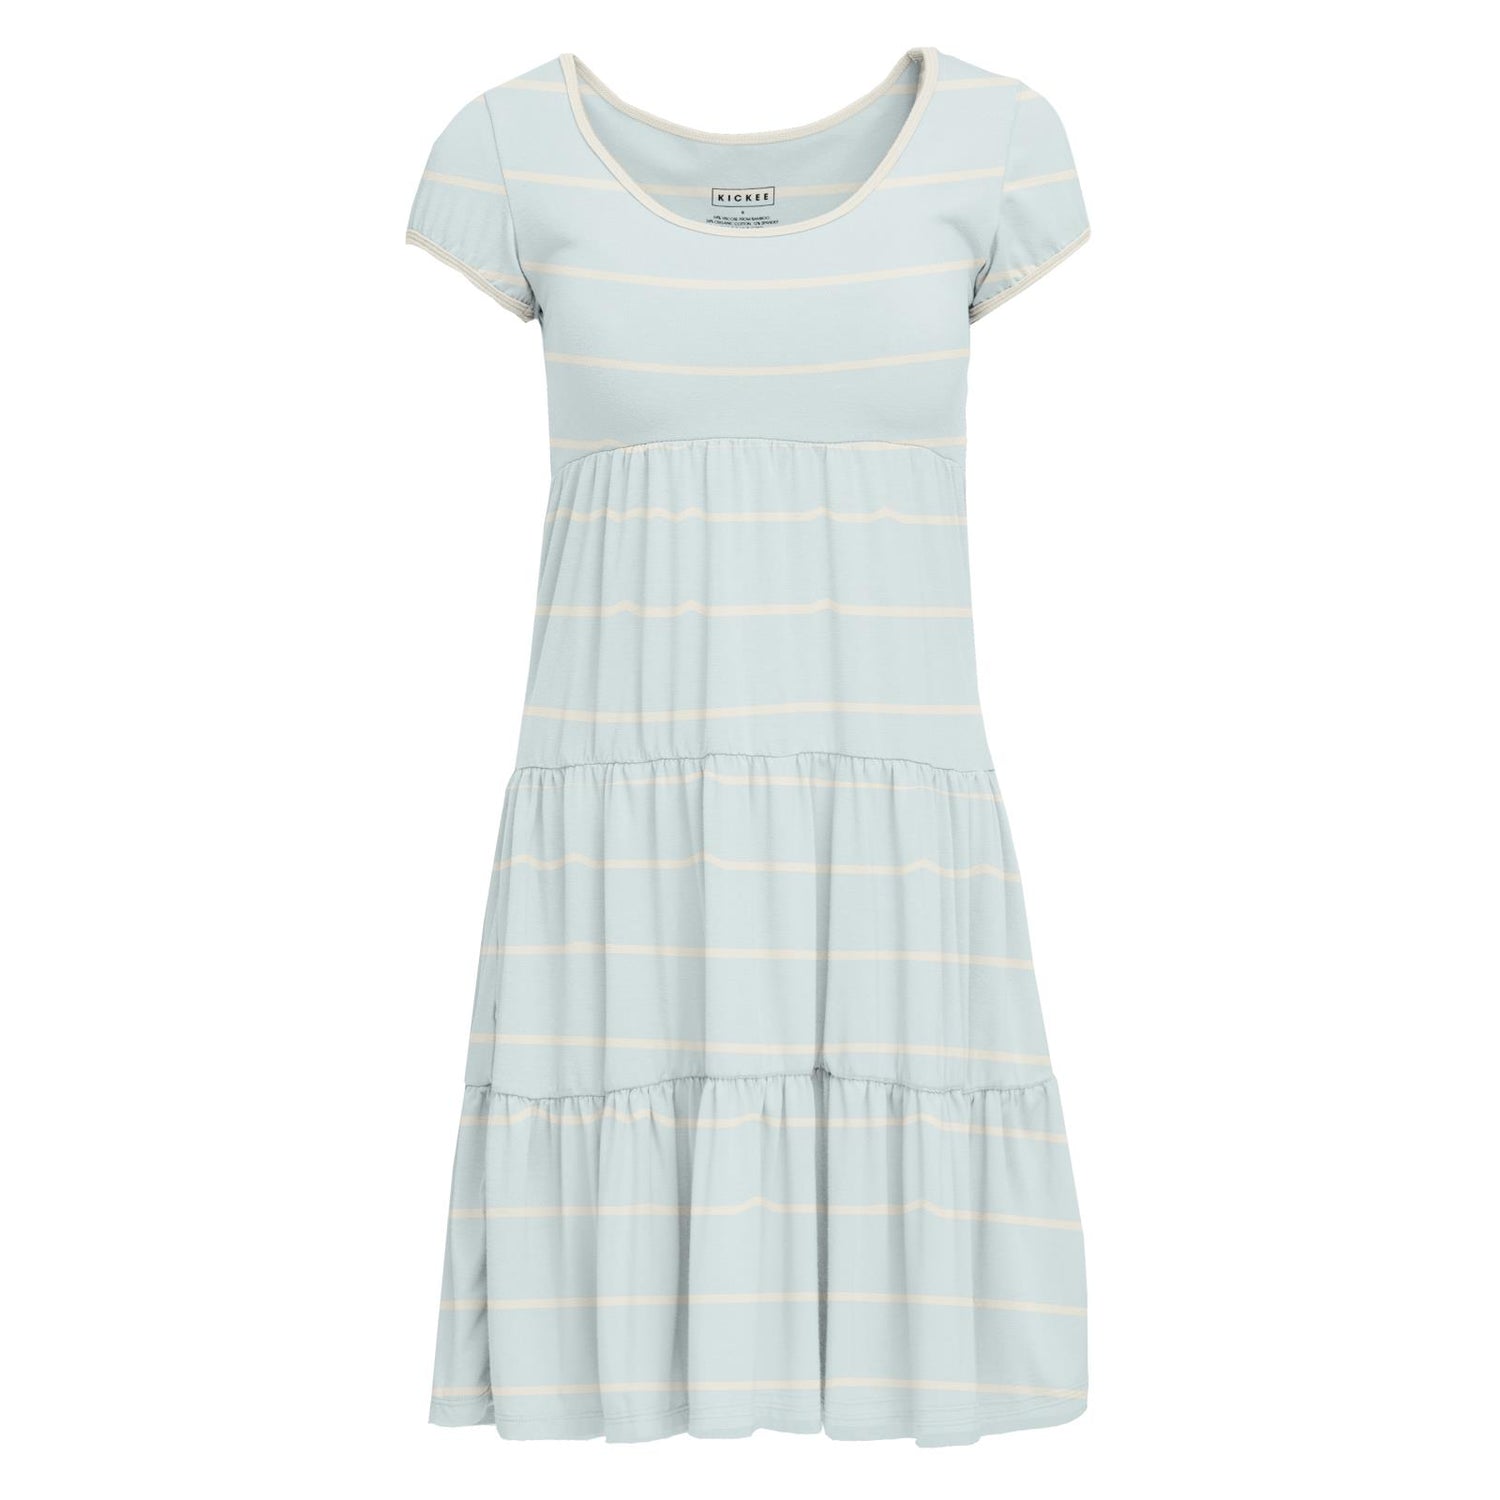 Women's Print Sundress with Luxe Top in Fresh Air Road Trip Stripe